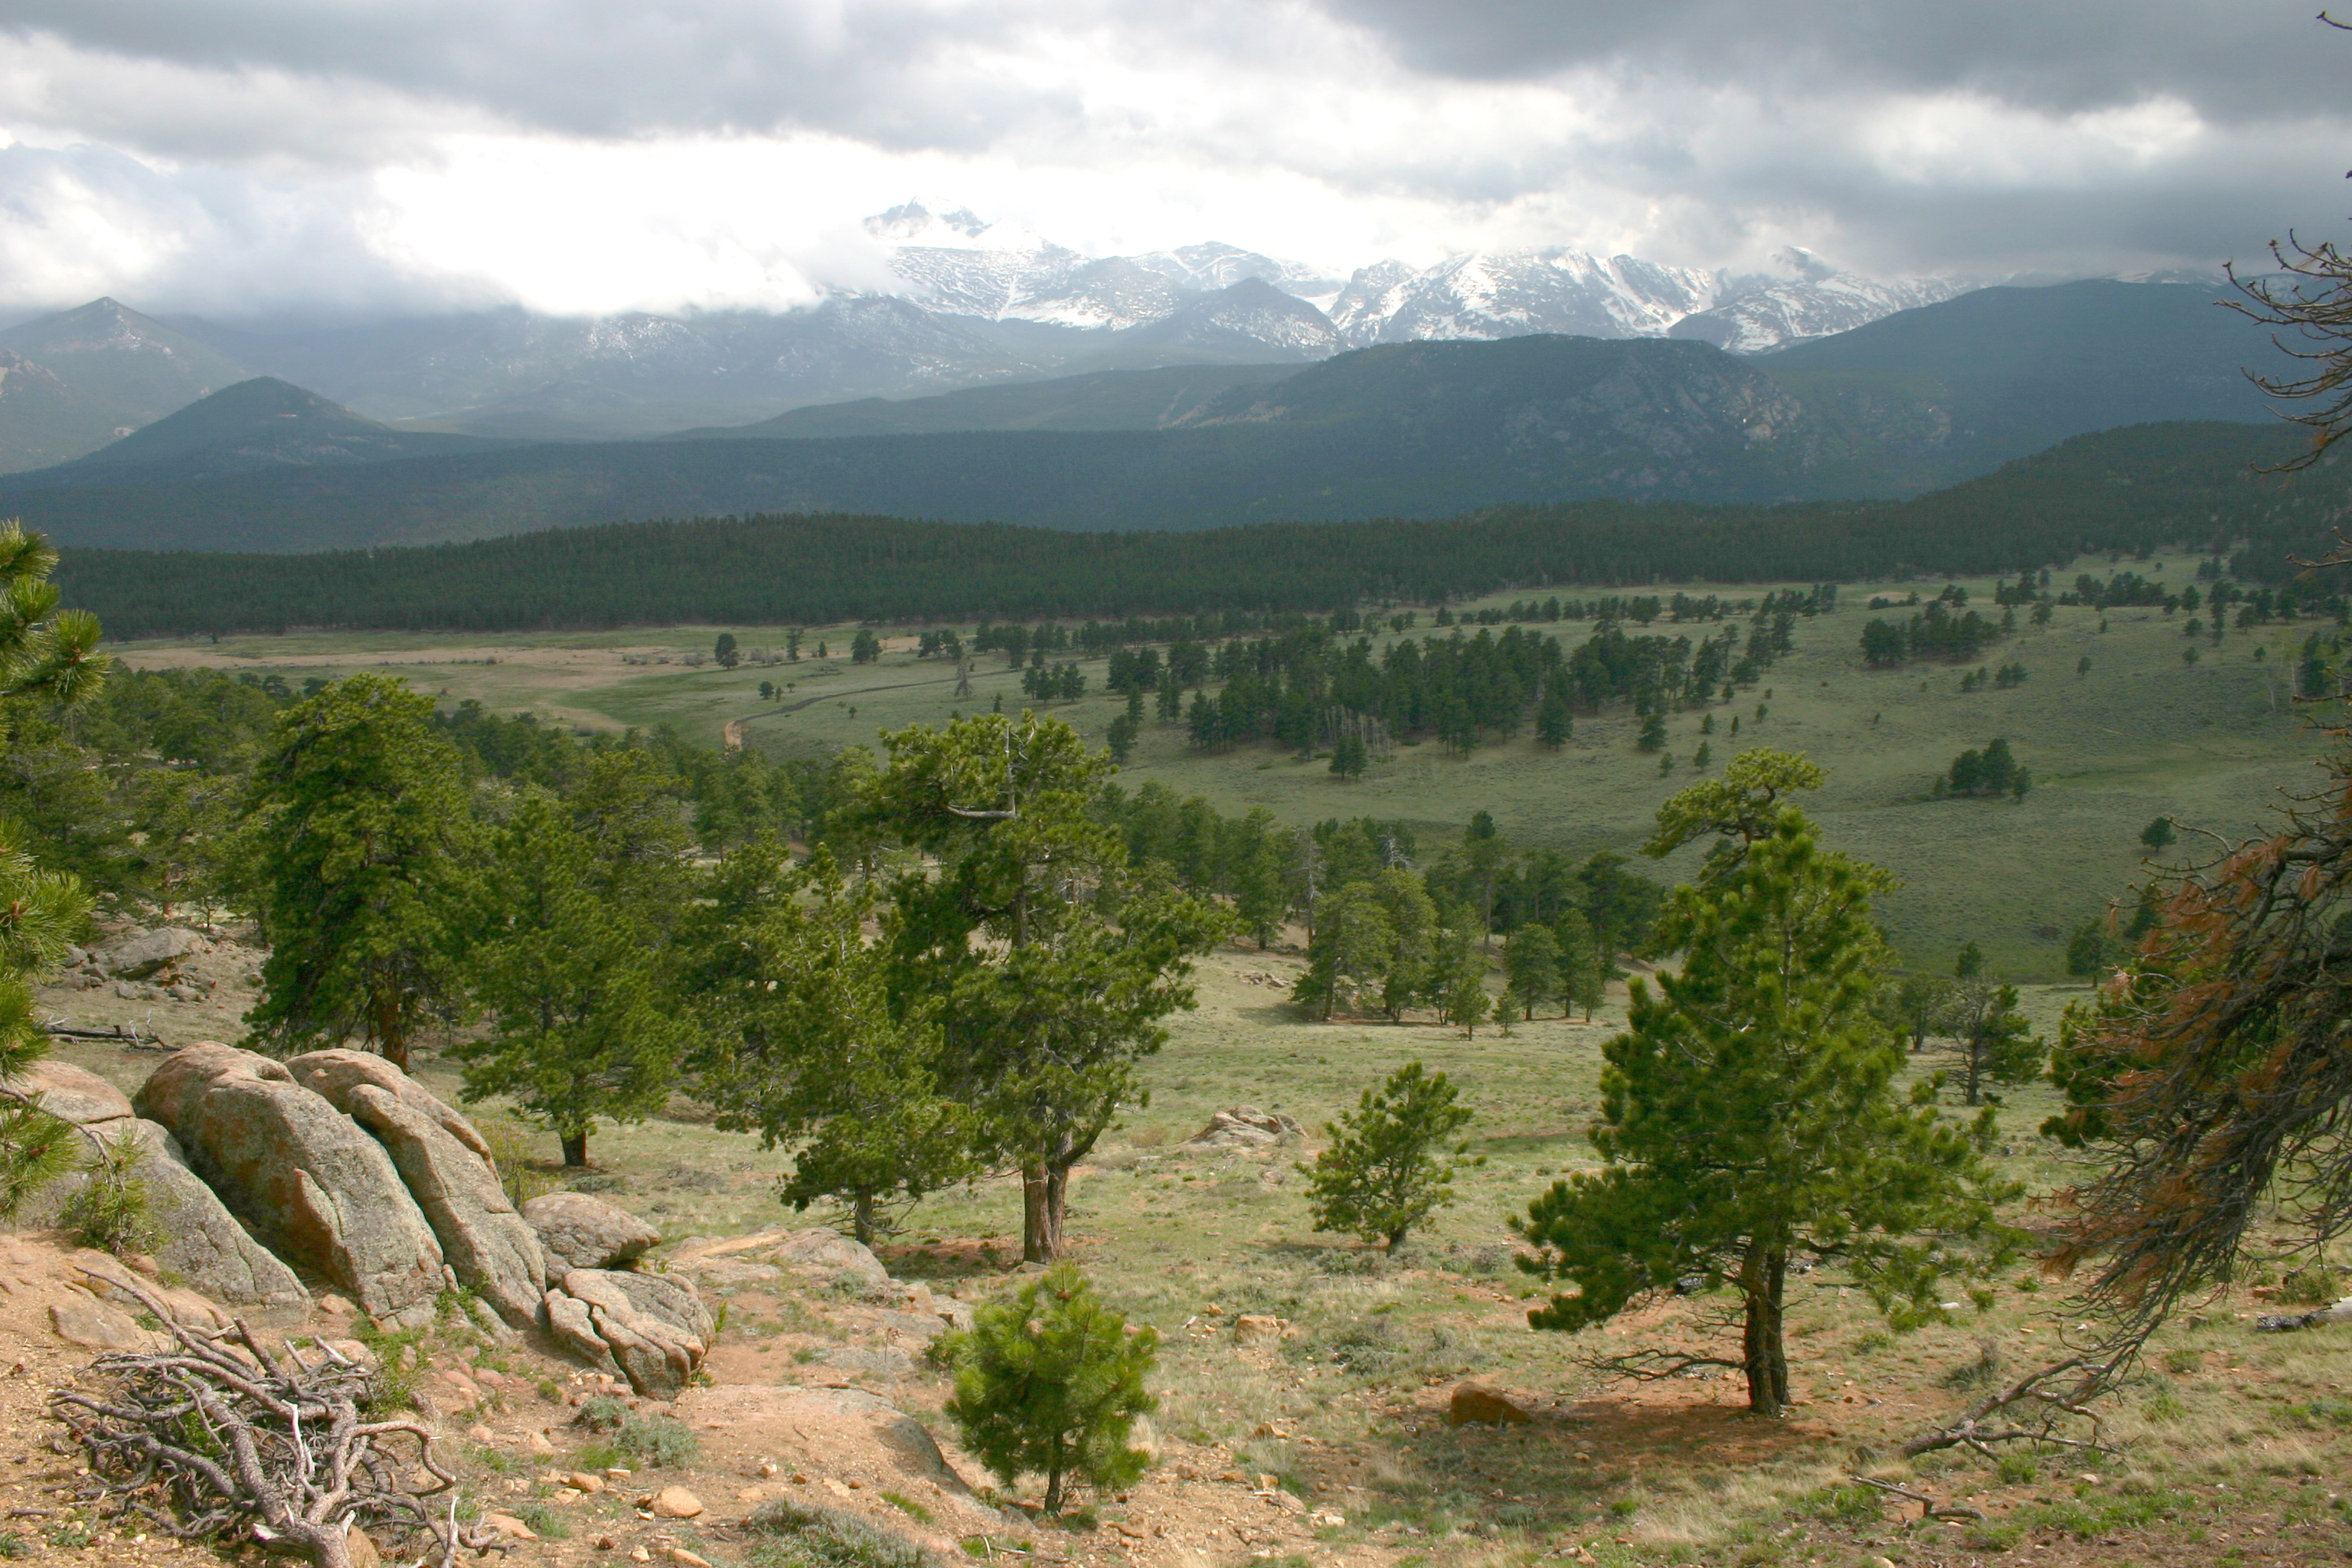 Photo of an open forest of ponderosa pines in Rocky Mountain National Forest. There are a few large boulders in the foreground, and far off along the horizon are the majestic snow-dusted peaks of the Rocky Mountains. In the valley before that, groups of ponderosa pine trees of various sizes are visible along the green and brown hills.